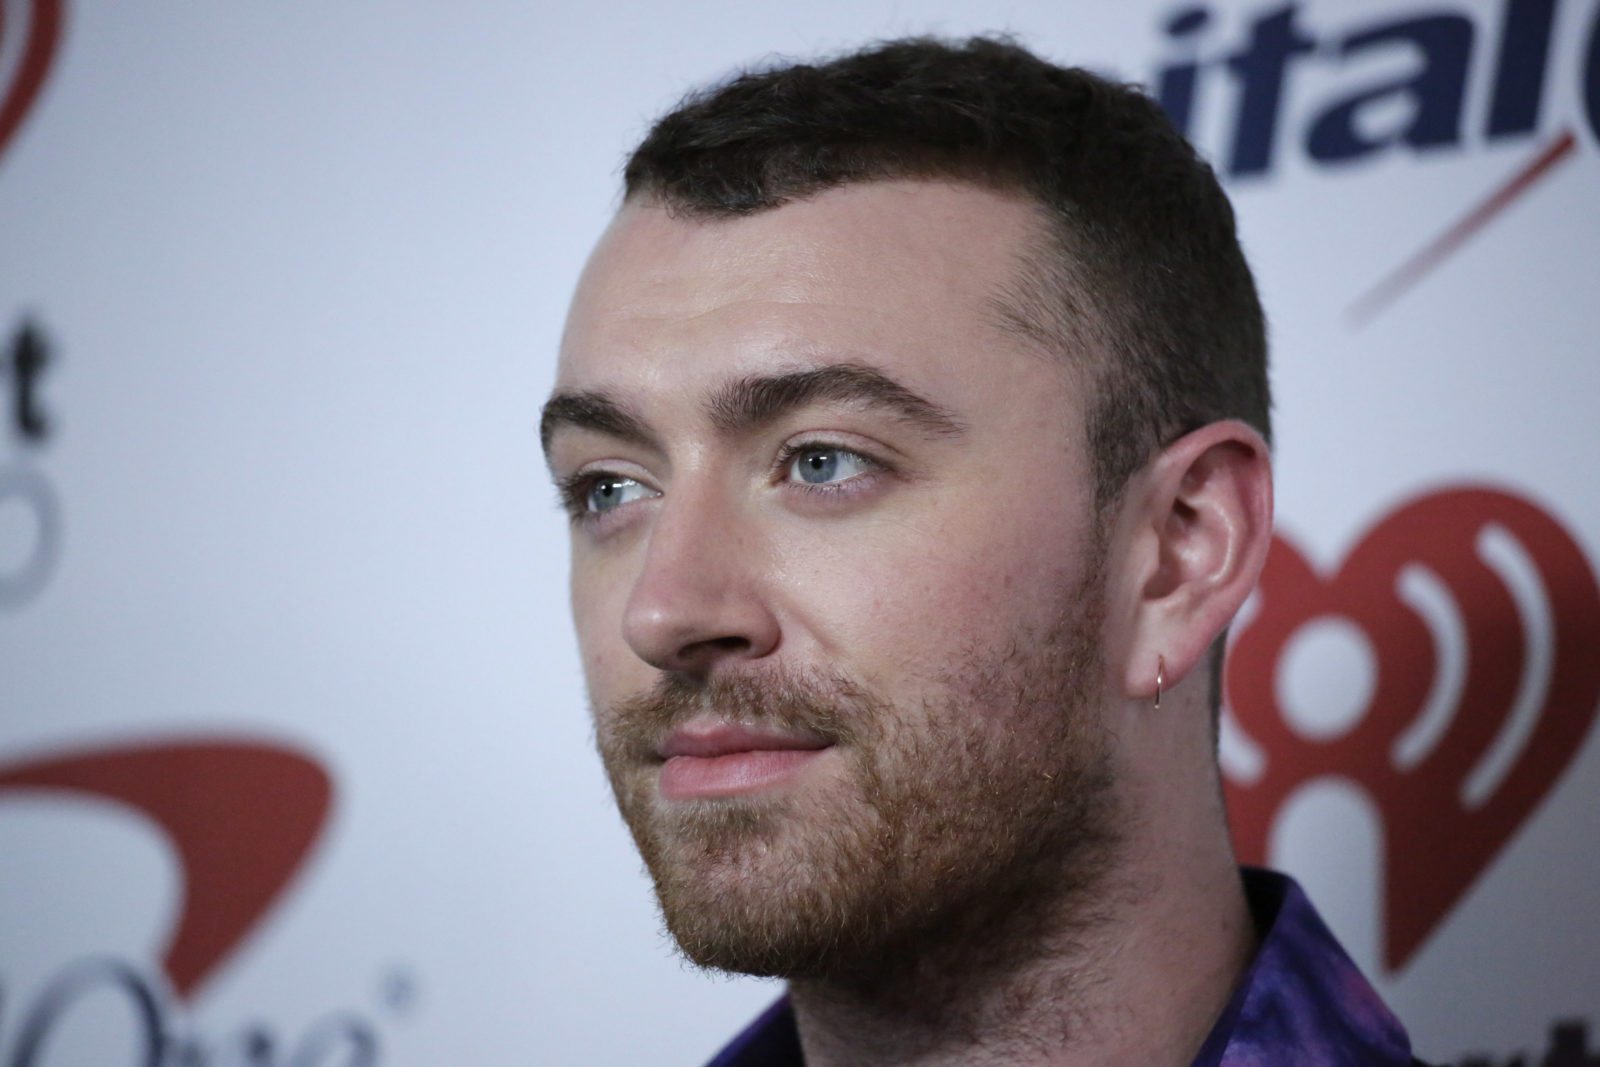 Sam Smith attends the Z100's iHeartRadio Jingle Ball 2017 at Madison Square gardens on December 8, 2017, in New York. / AFP PHOTO / KENA BETANCUR (Photo credit should read KENA BETANCUR/AFP/Getty Images)